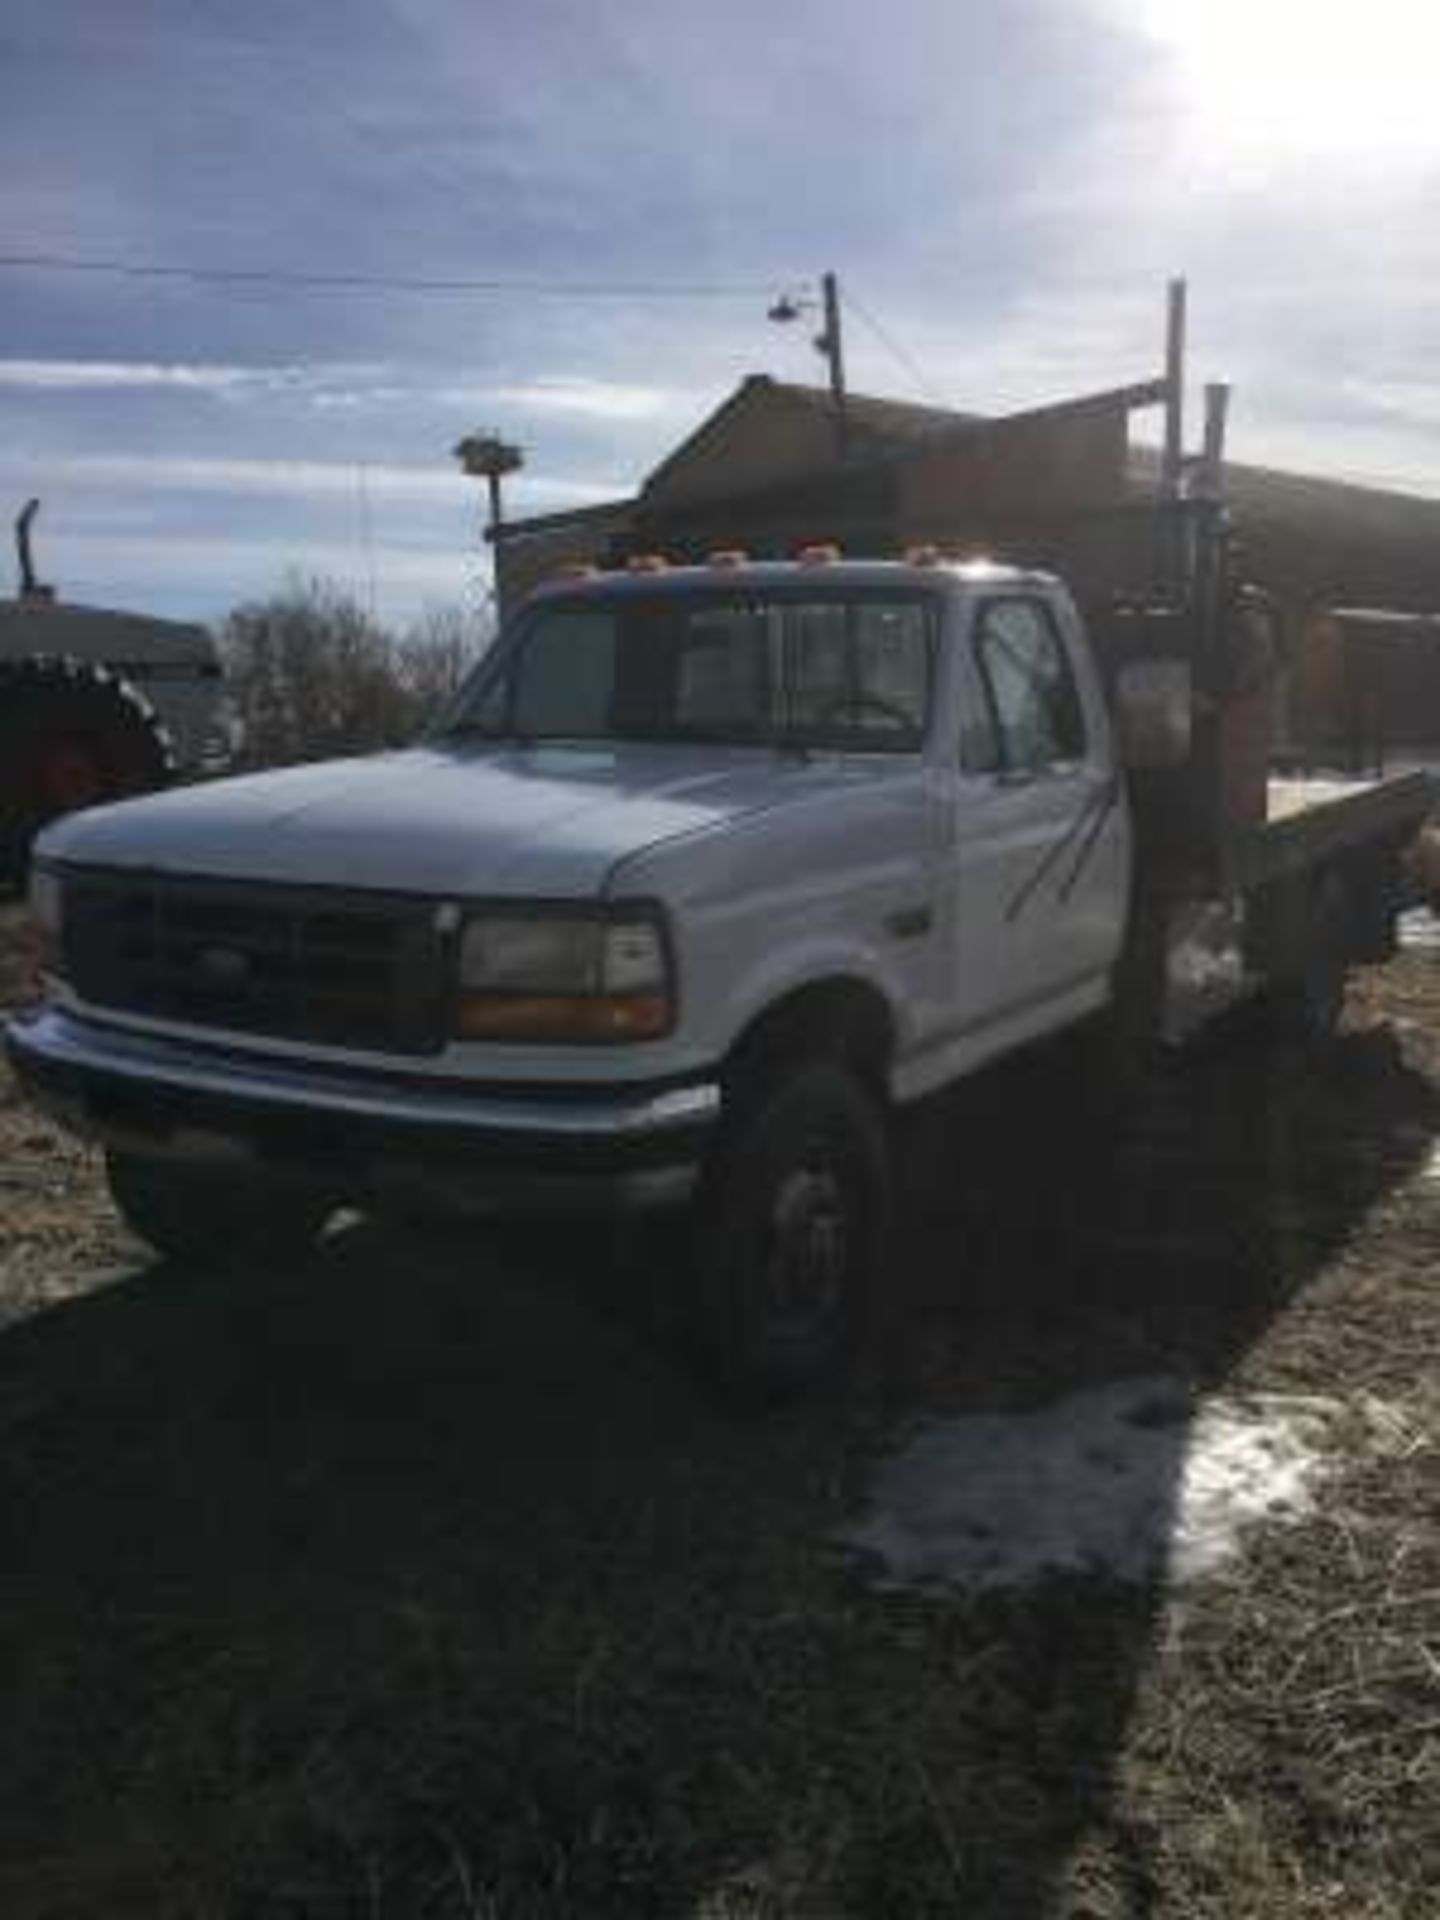 1995 Ford F350 Flat Deck Truck, 4X4, 7.3 Dsl, 282,000kms, 5th wheel hitch - Image 5 of 6